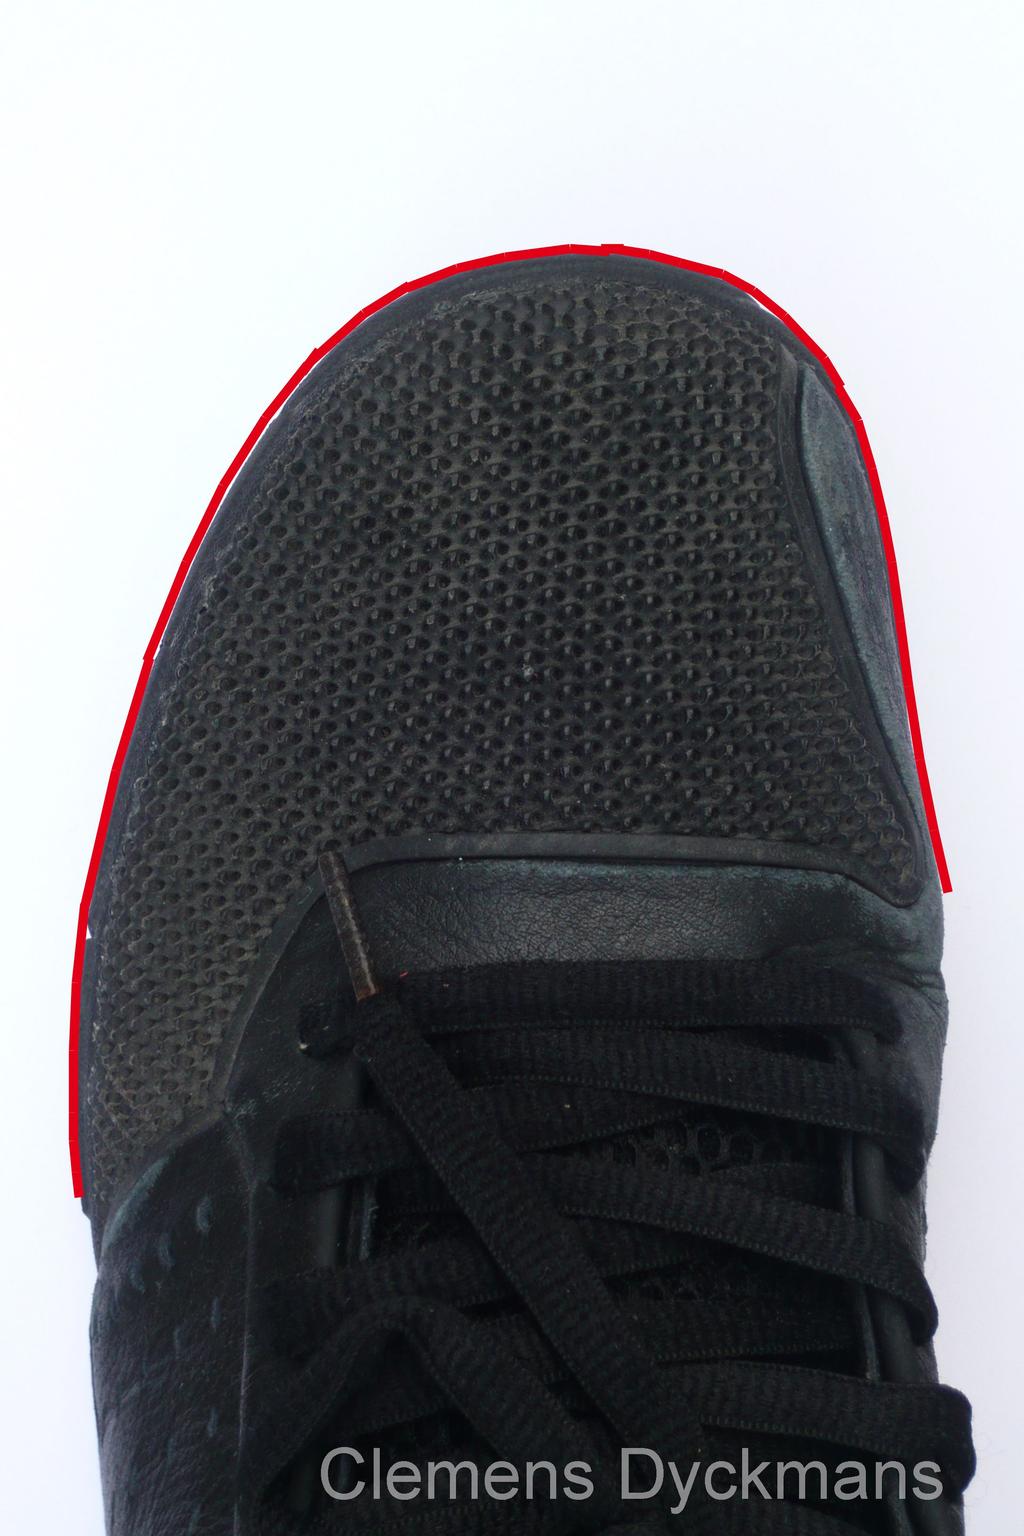 mind, whether it is the toe box, the side panels or the tongue. The only part that is not breathable is the heel, all other areas feature a technique that allows air flow.